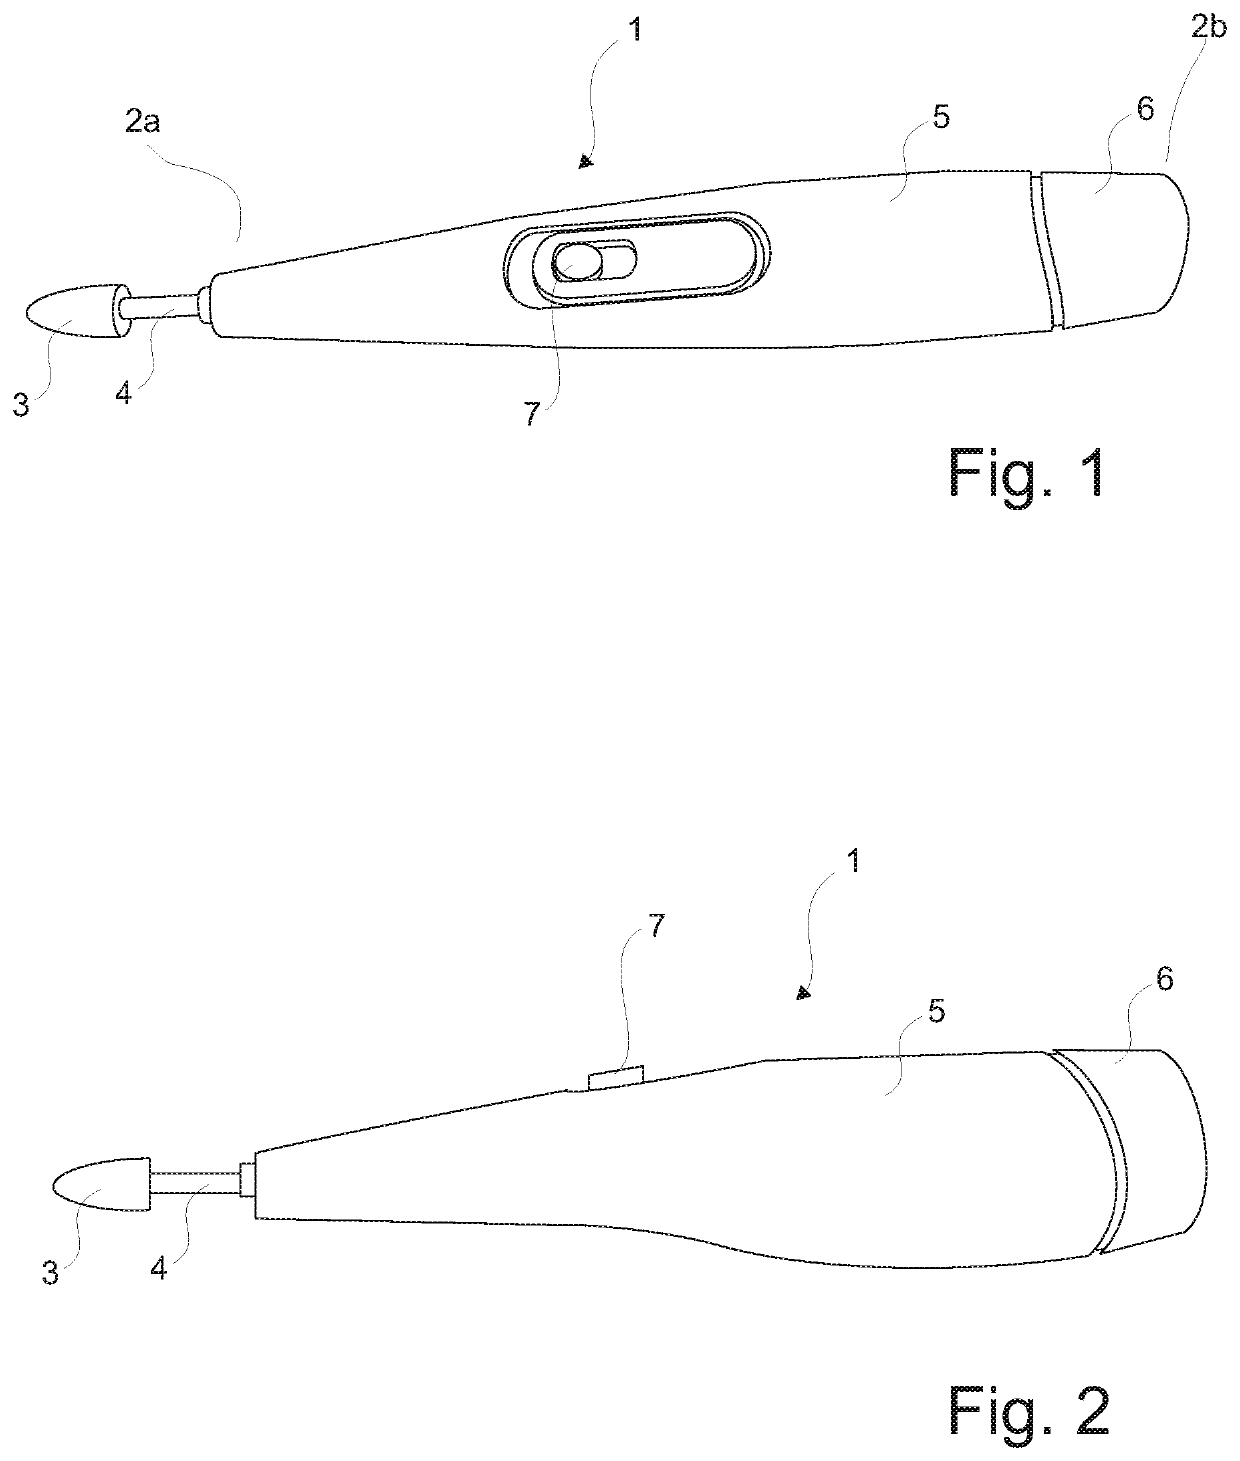 Eye treatment device and a method of using said device